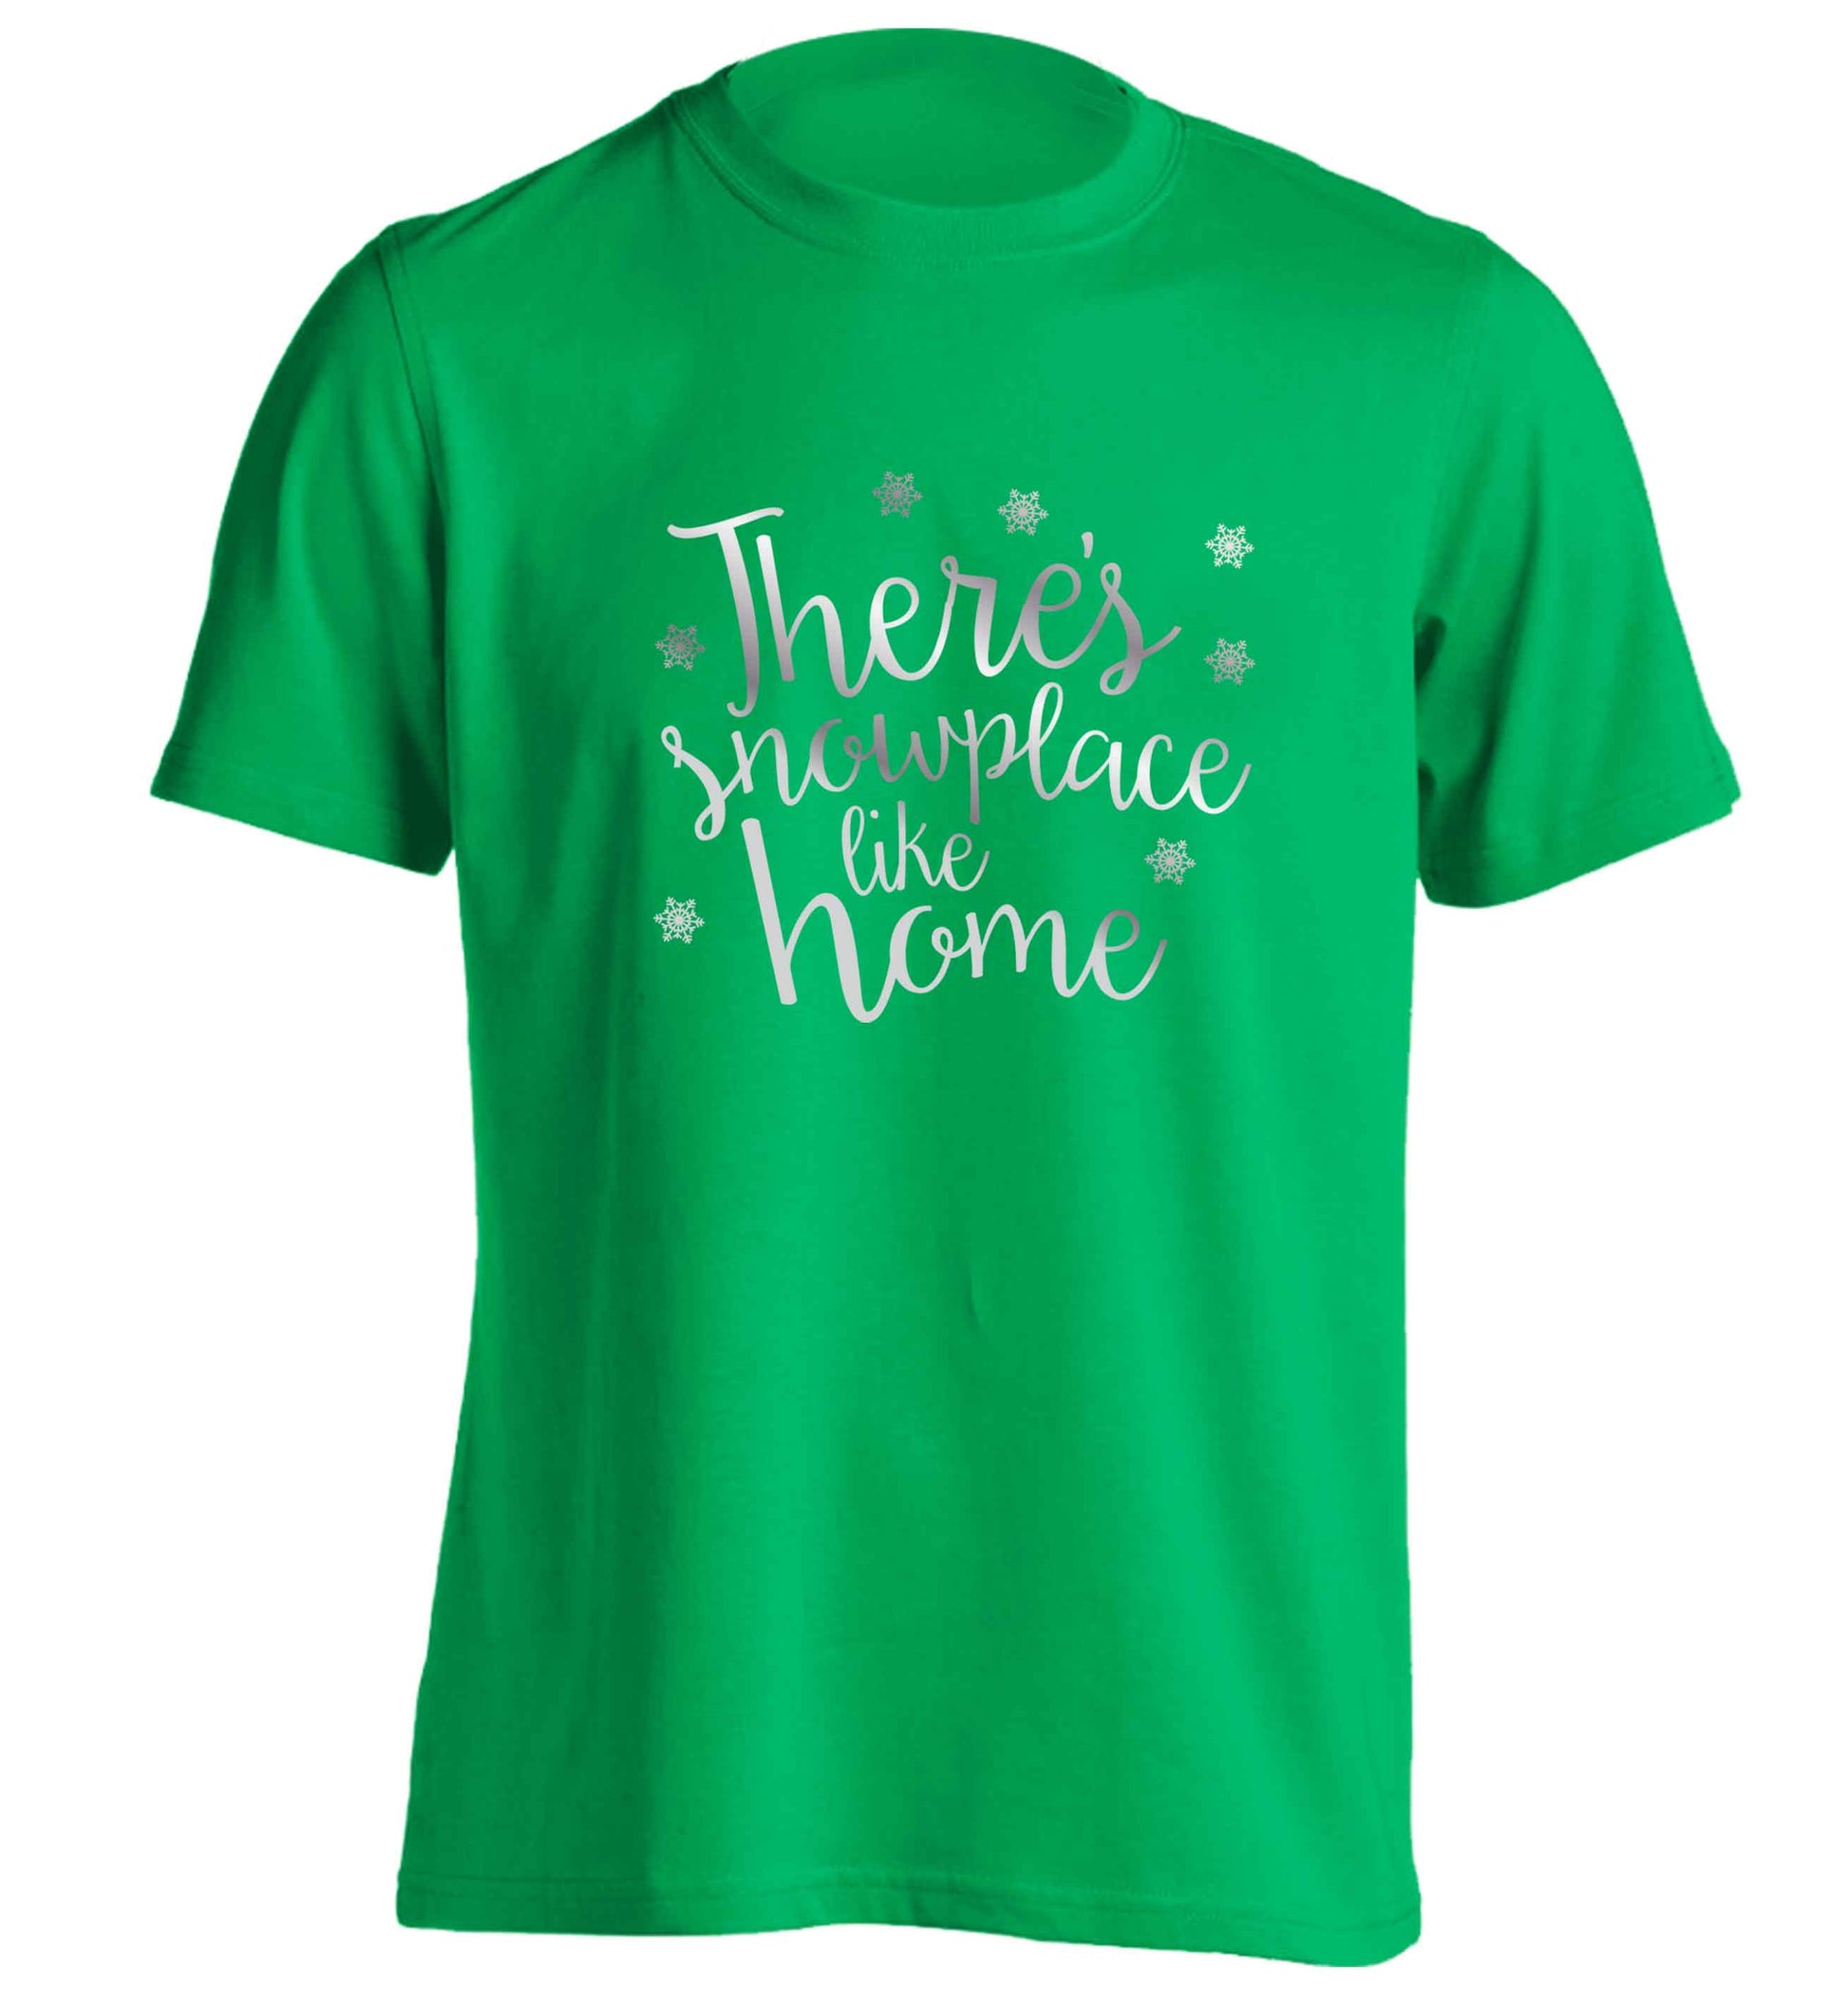 There's snowplace like home - metallic silver adults unisex green Tshirt 2XL